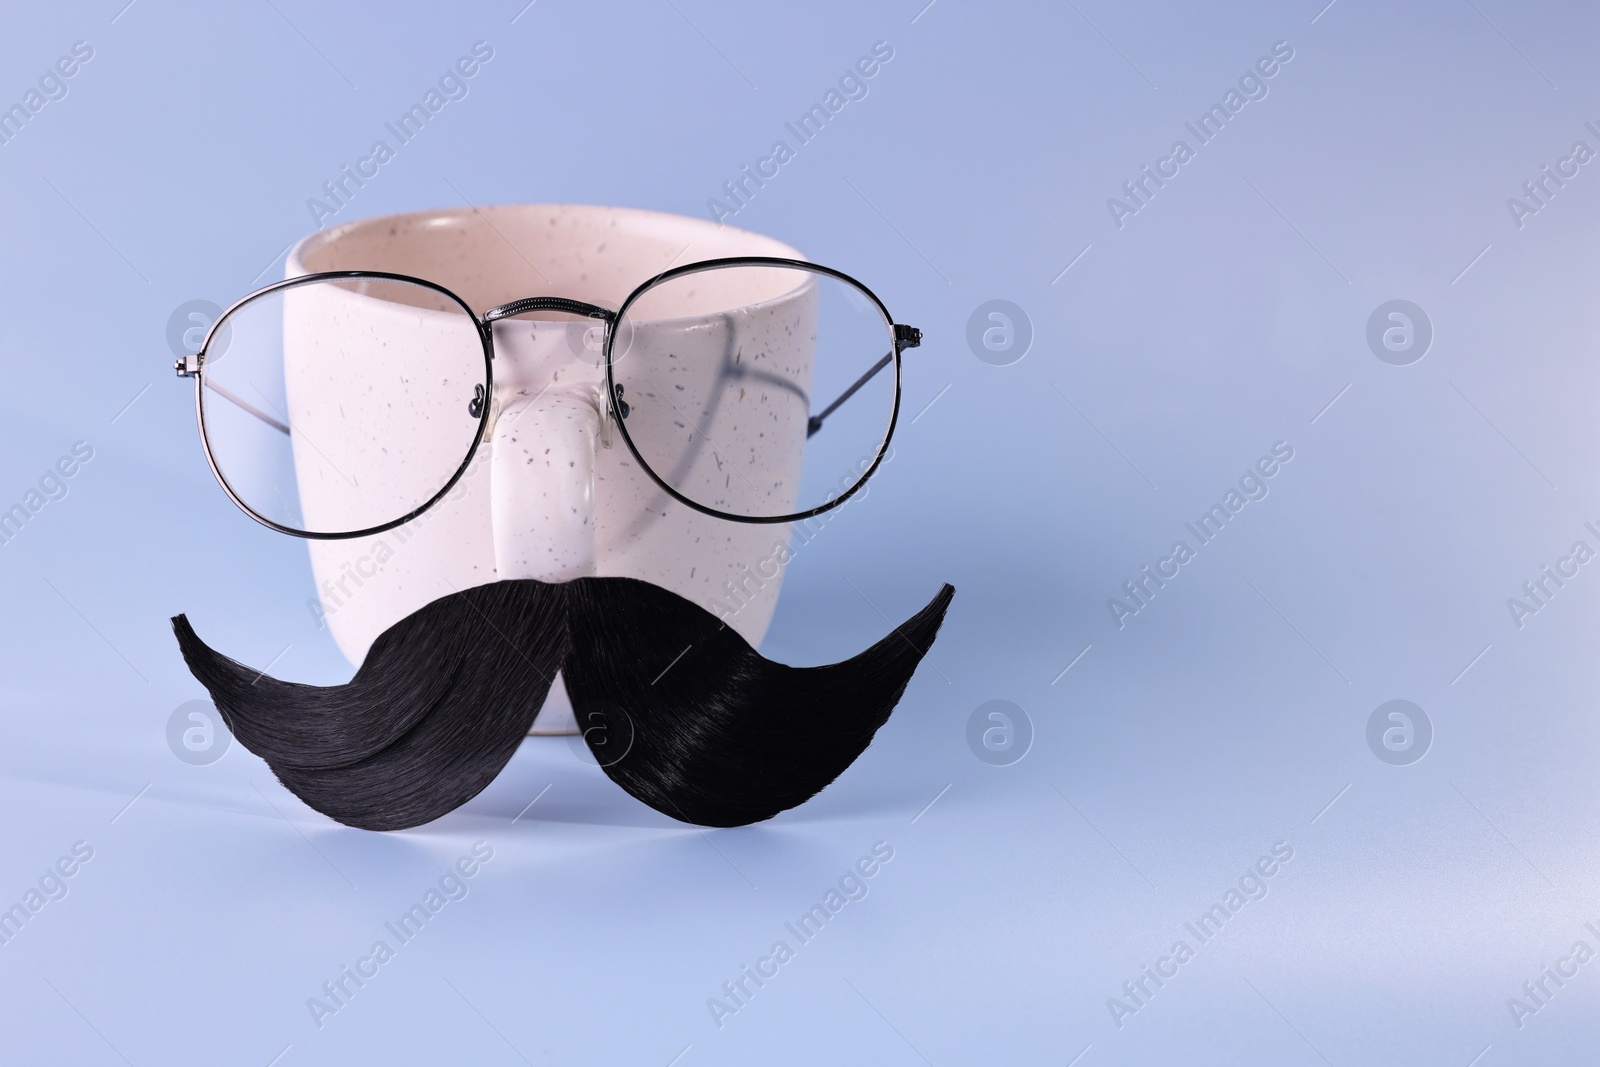 Photo of Man's face made of artificial mustache, glasses and cup on light blue background. Space for text